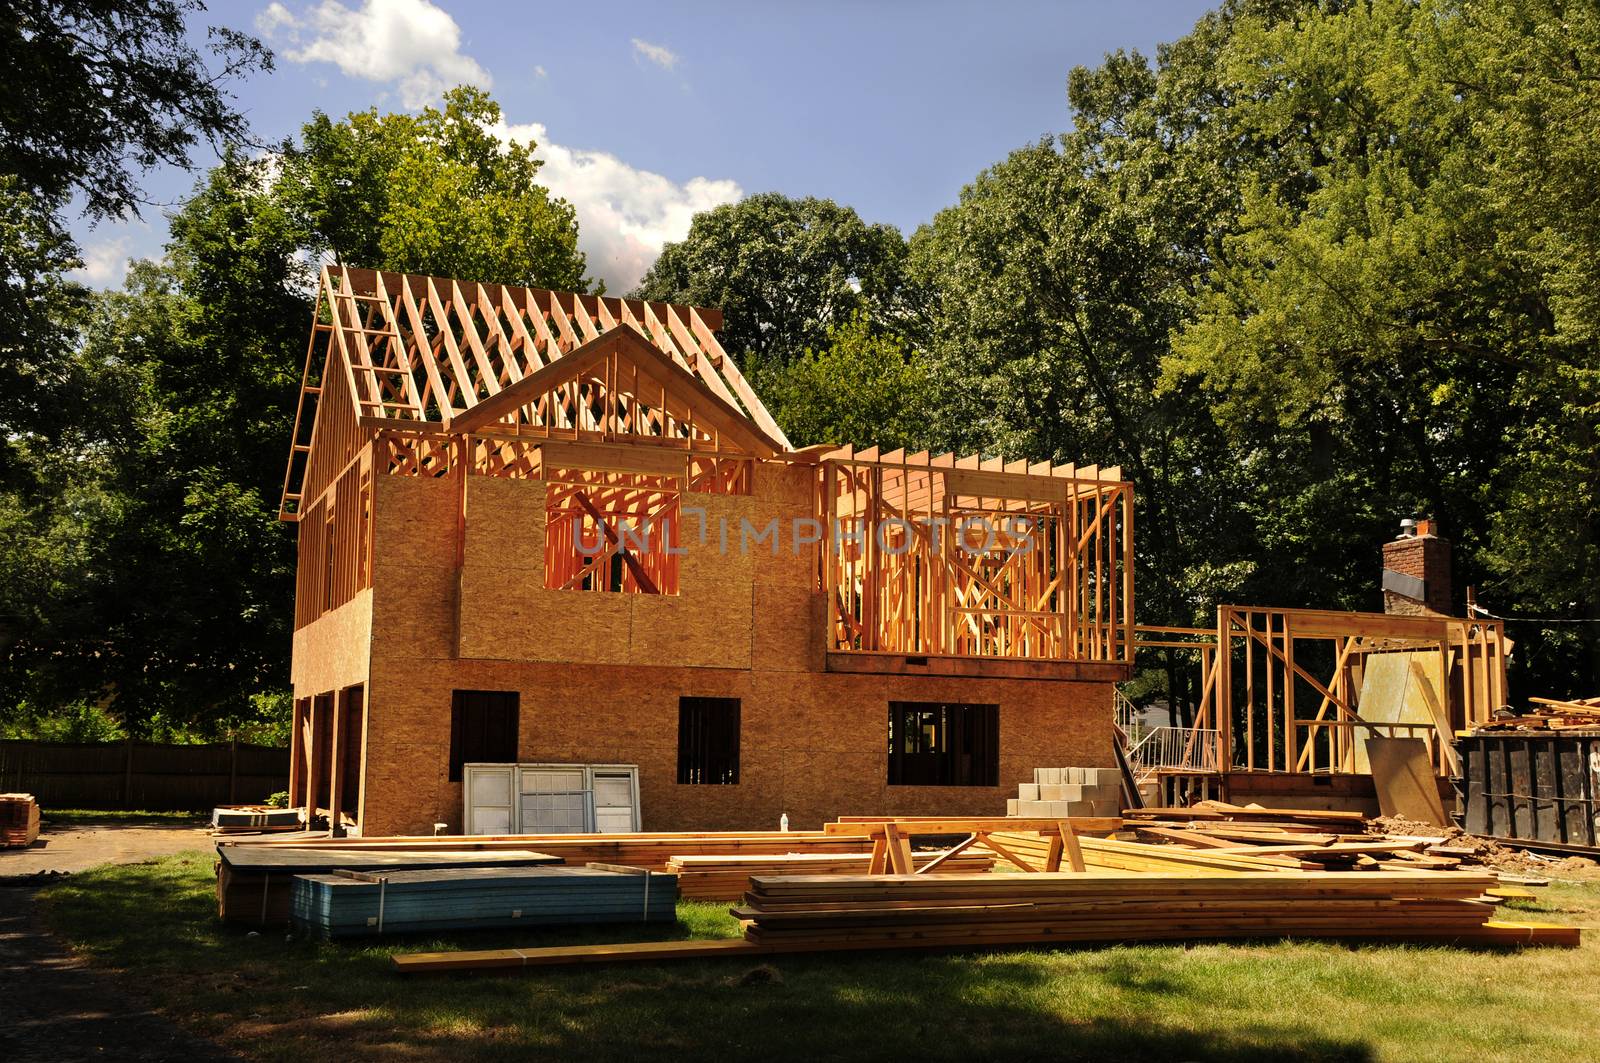 A residential home under construction mid framing and sheathing by Balefire9